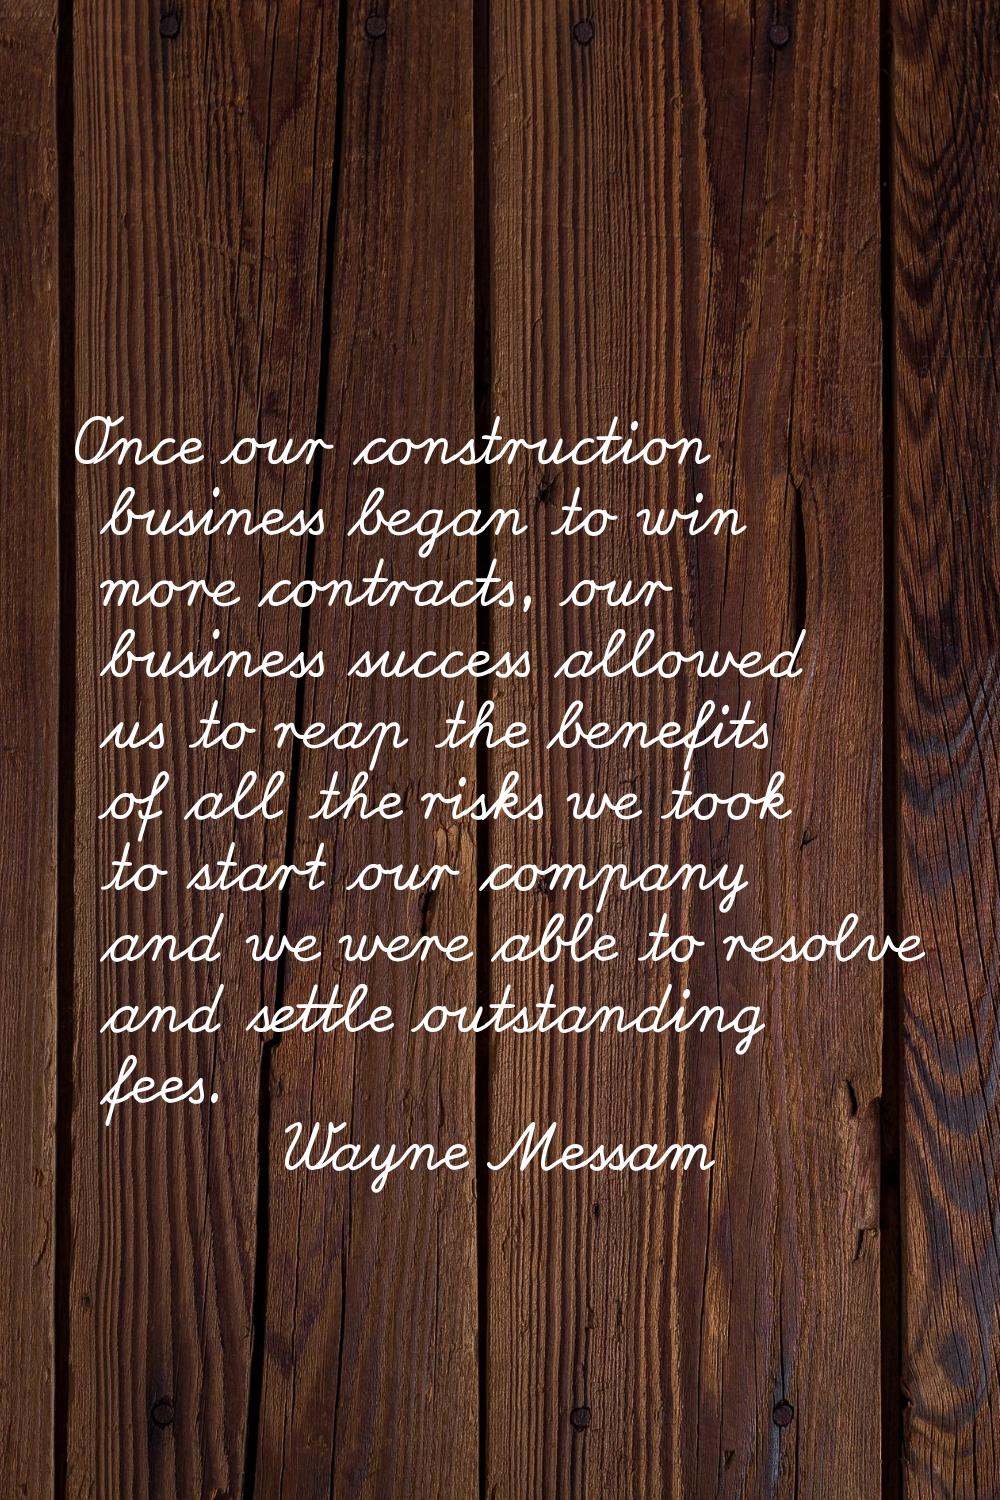 Once our construction business began to win more contracts, our business success allowed us to reap